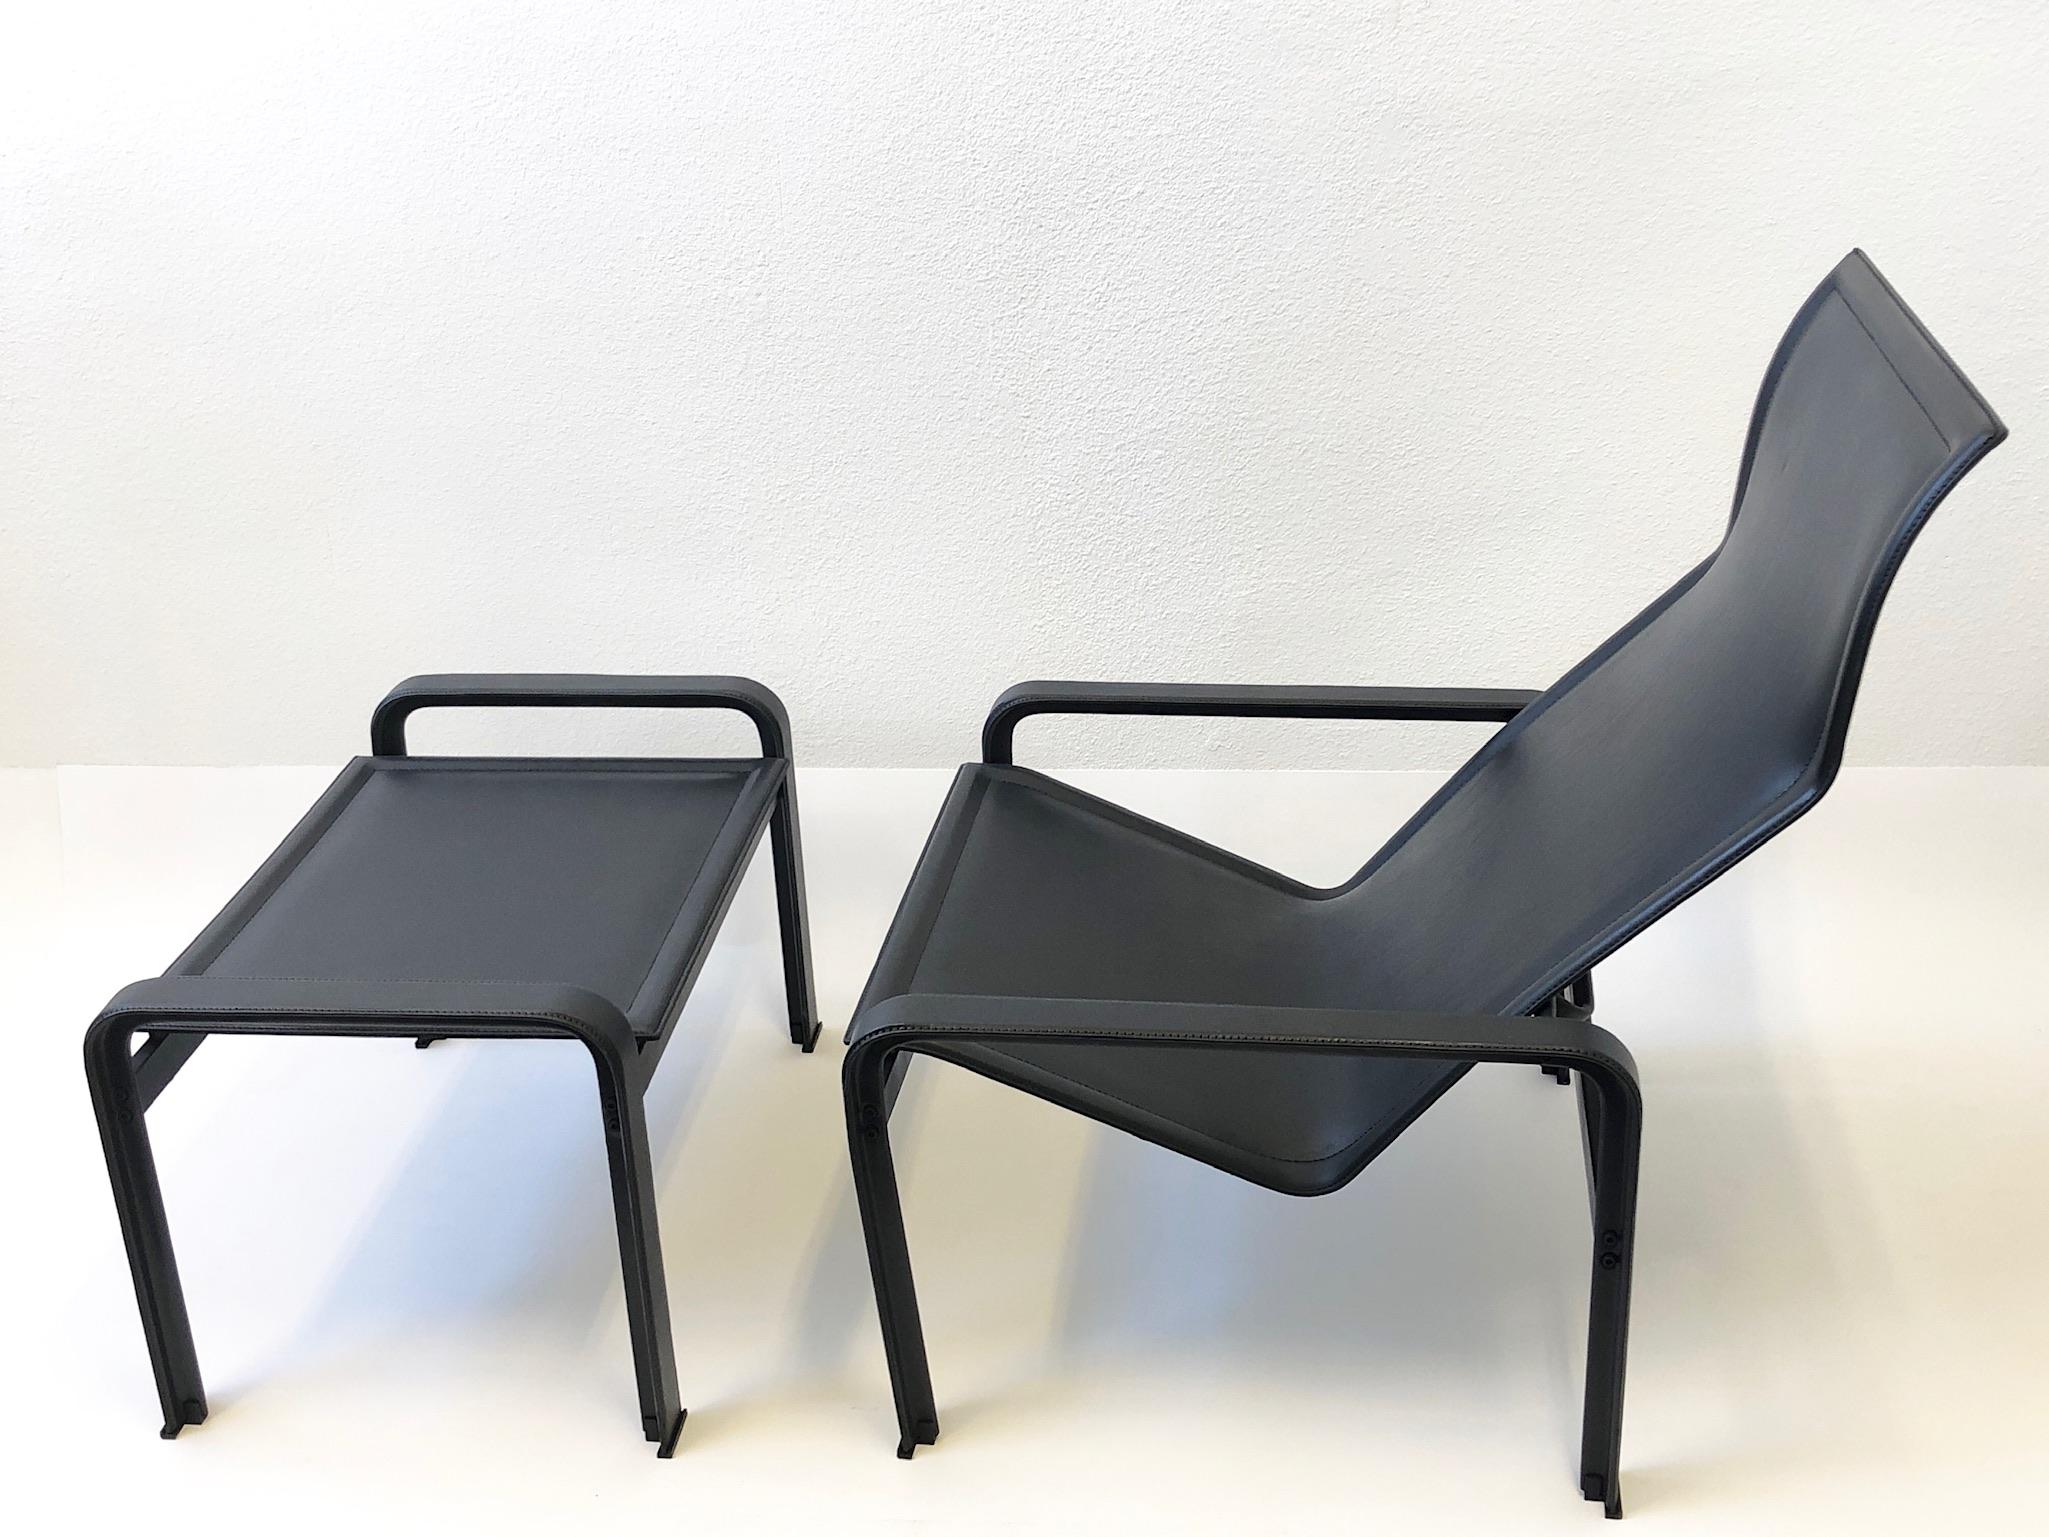 1970s Italian black leather lounge chair and ottoman by Matteo Grassi. 
Constructed of metal frame covered with black thick saddle leather. 
Newly restored, shows minor wear consistent with age. 
Both chair and ottoman are marked Matteo Grassi.